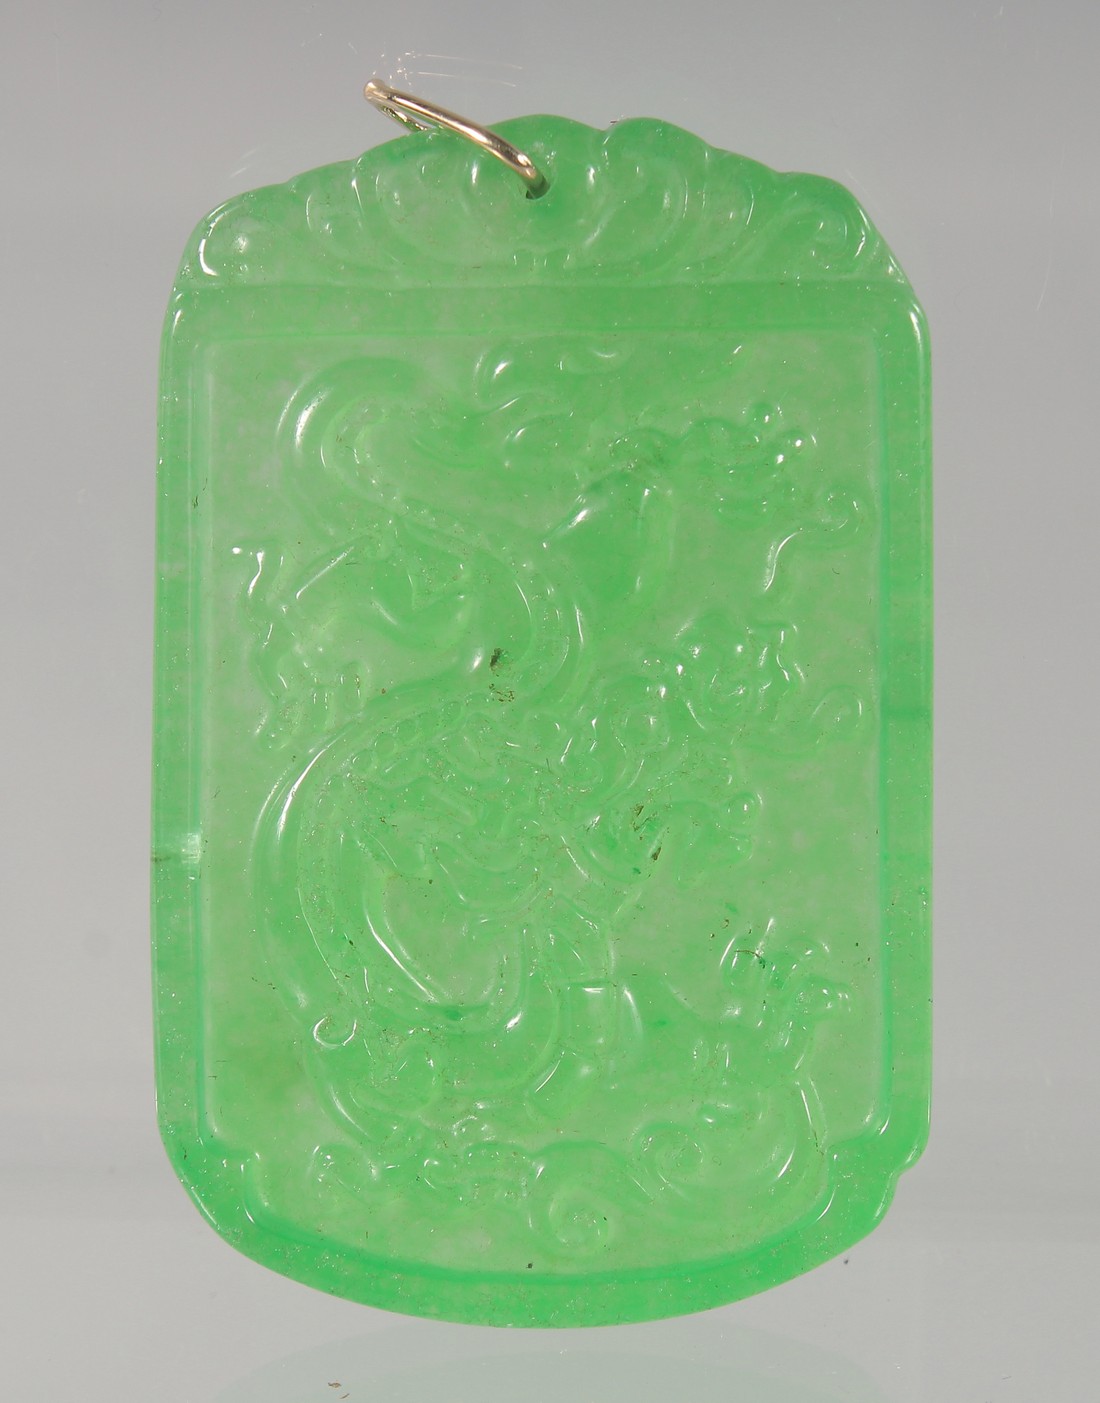 A CARVED GREEN JADE PENDANT with a gold suspension loop. 5.5cm high.